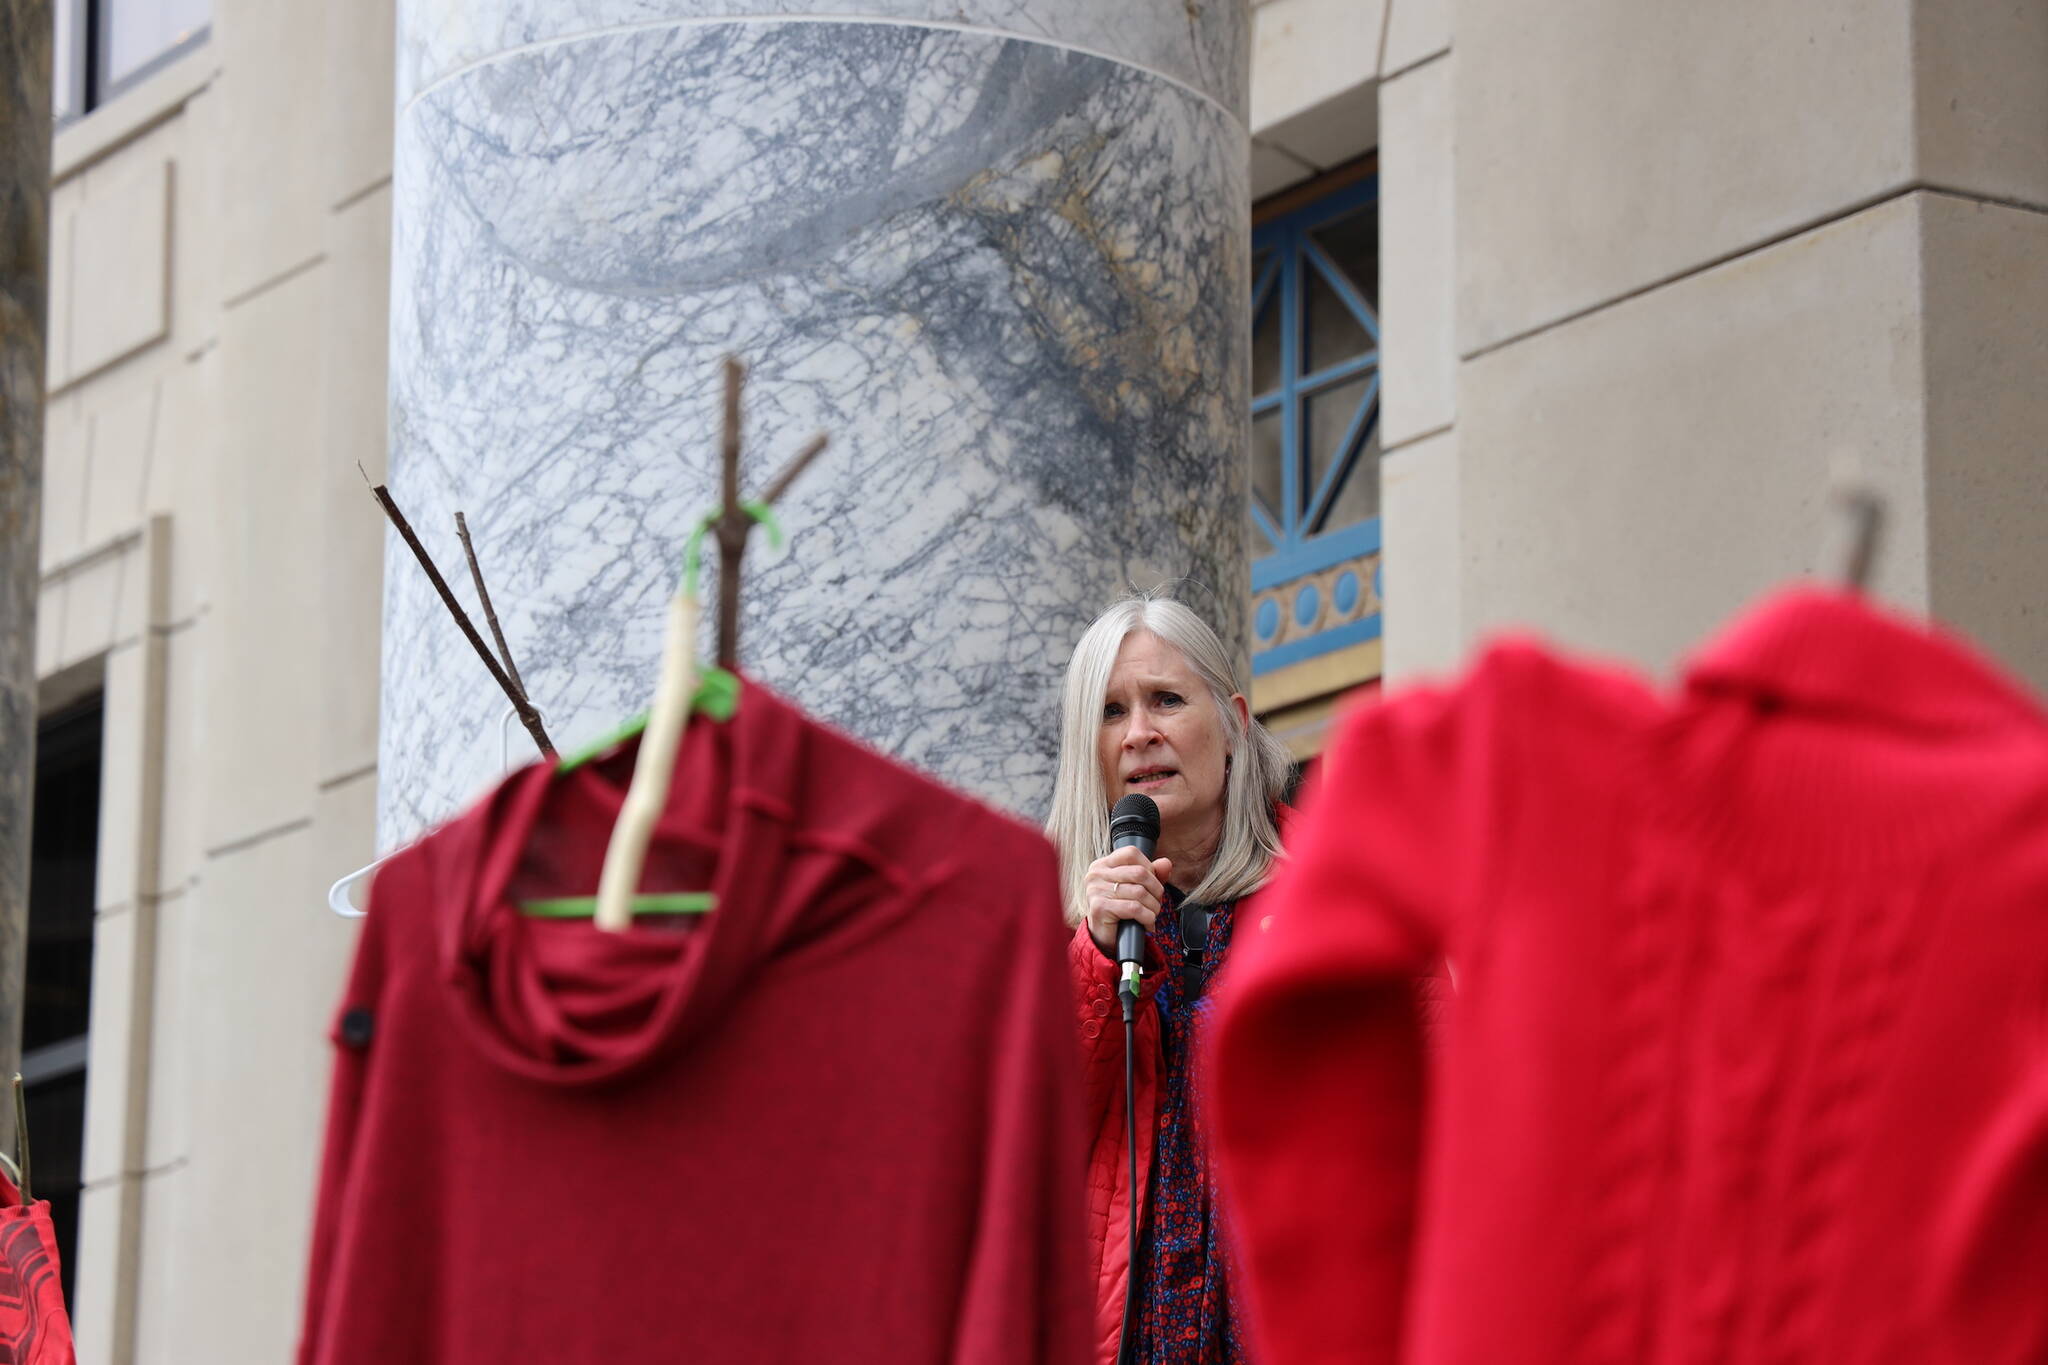 Rep. Andi Story, a Juneau Democrat, speaks to the crowd of hundreds who gathered at the steps of the Alaska State Capitol Friday evening for a rally and march to recognize Missing and Murdered Indigenous Peoples Awareness Day held each year on May 5. (Clarise Larson / Juneau Empire)